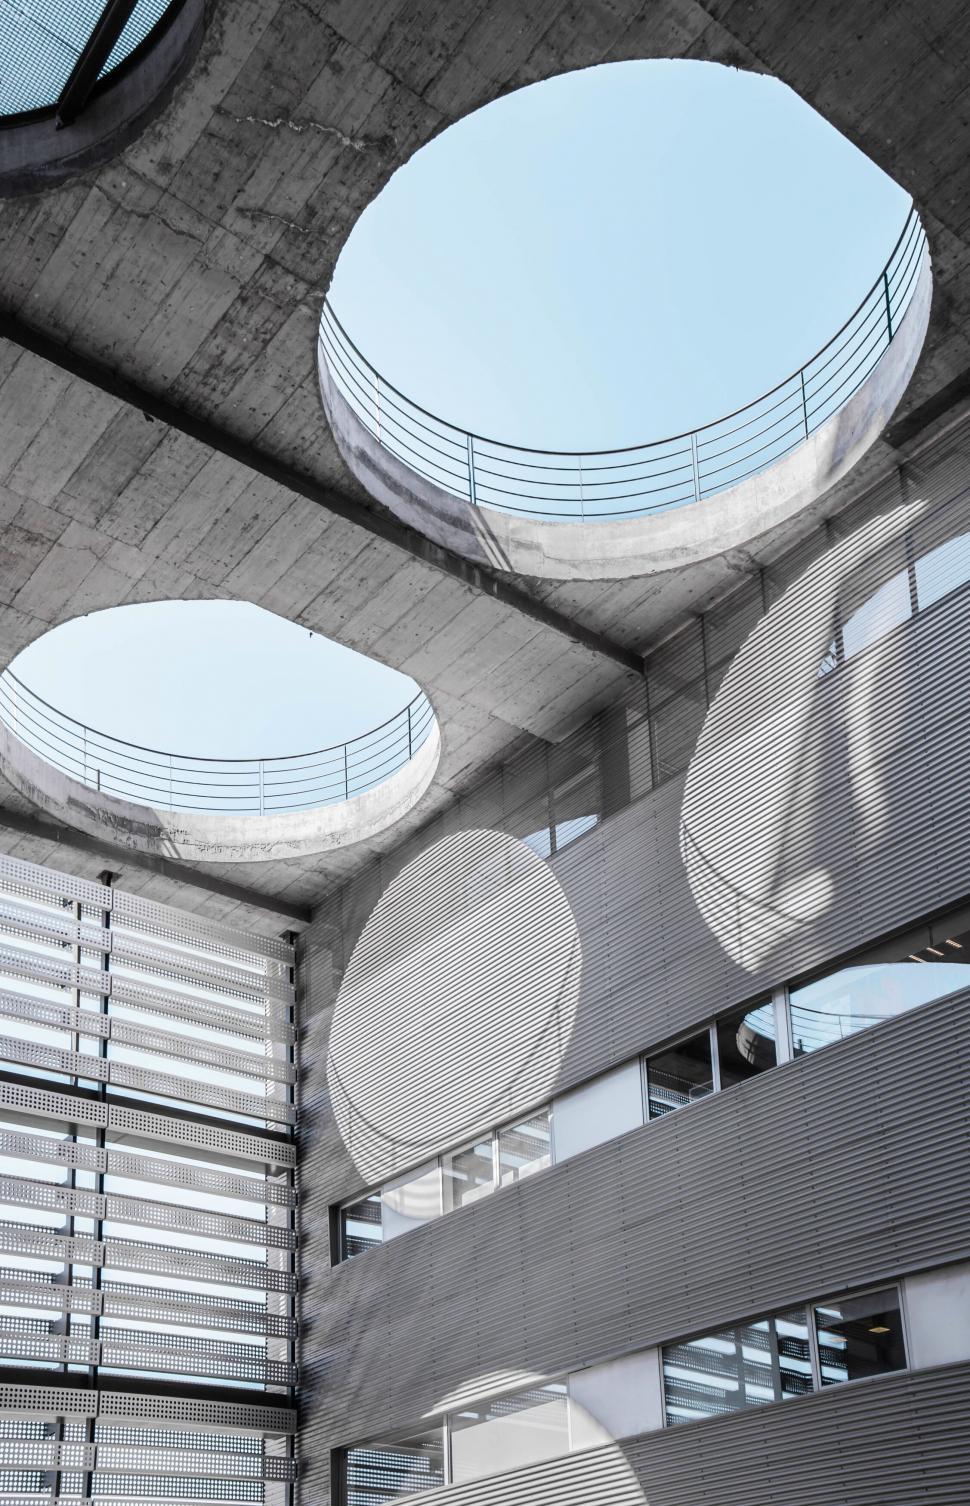 Free Image of Concrete structure with circular ceiling openings. 